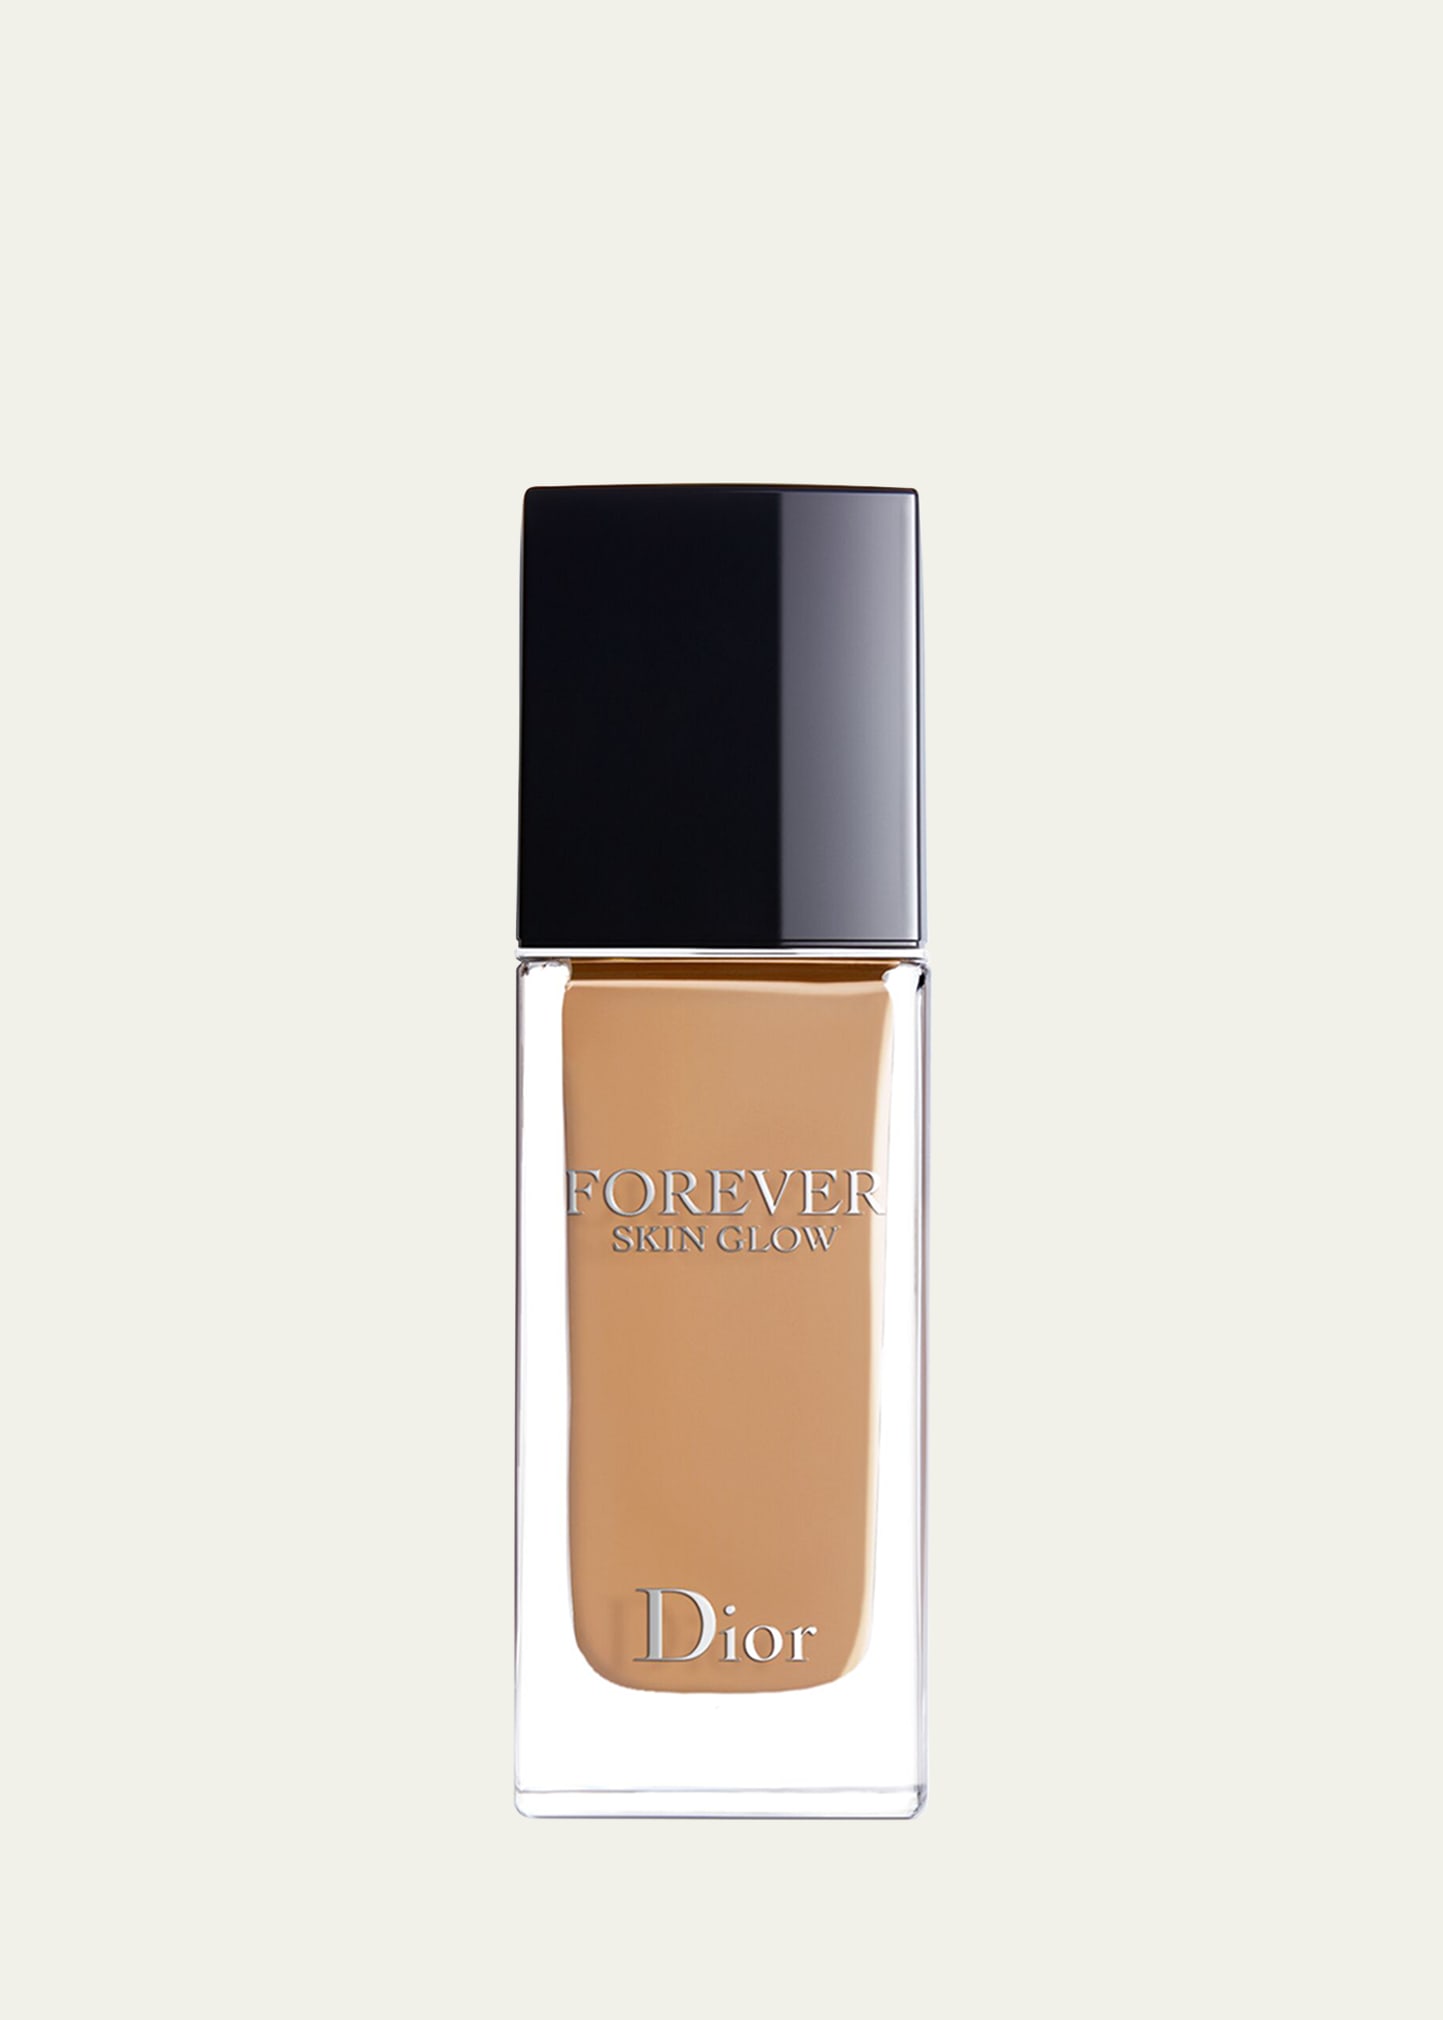 Dior 1 Oz.  Forever Skin Glow Hydrating Foundation Spf 15 In 4 Neutral